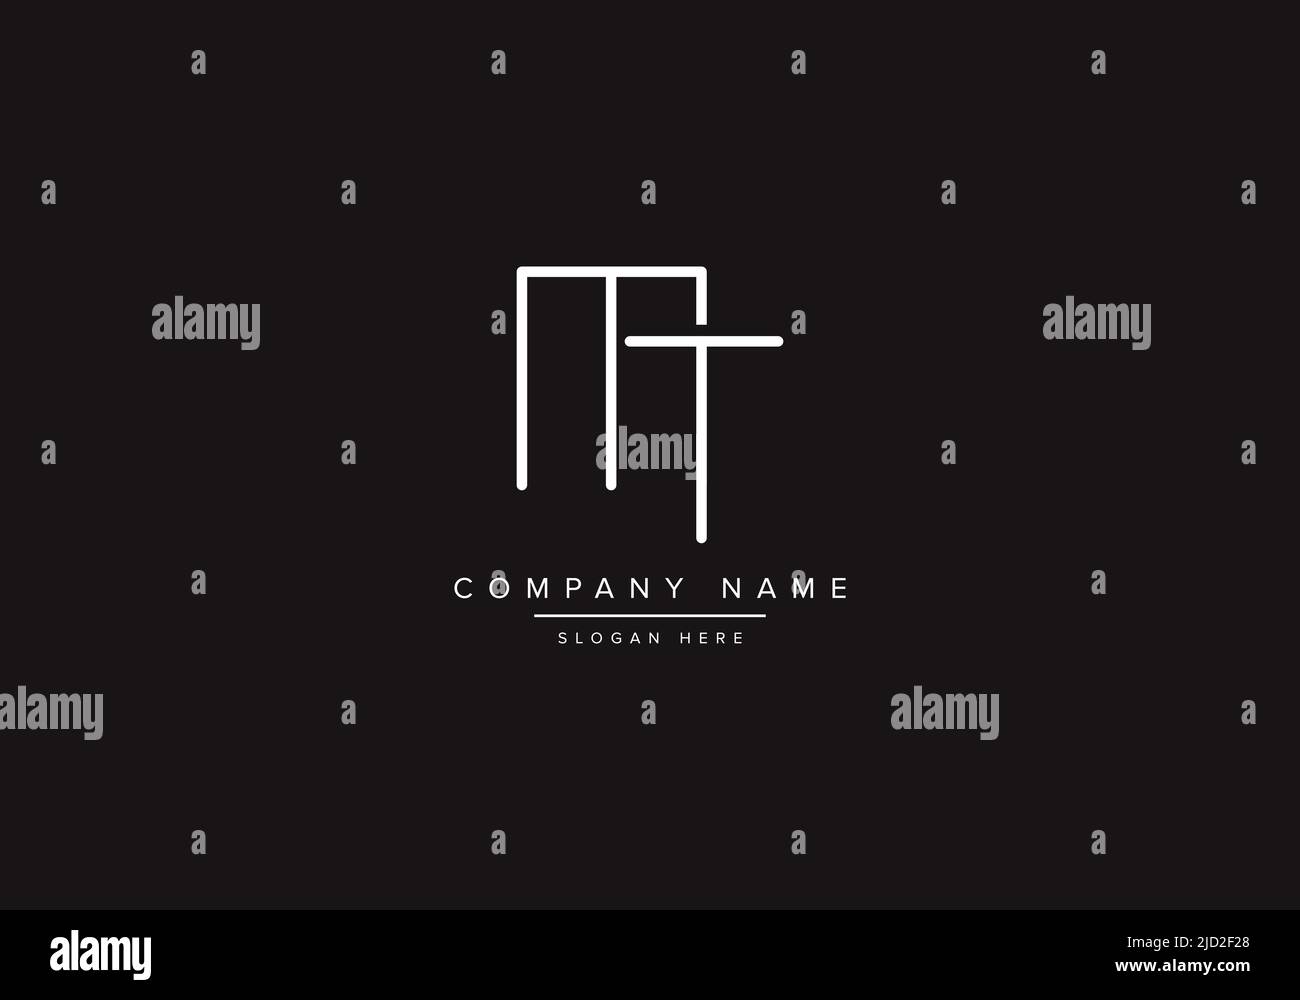 Hey business logo Black and White Stock Photos & Images - Alamy